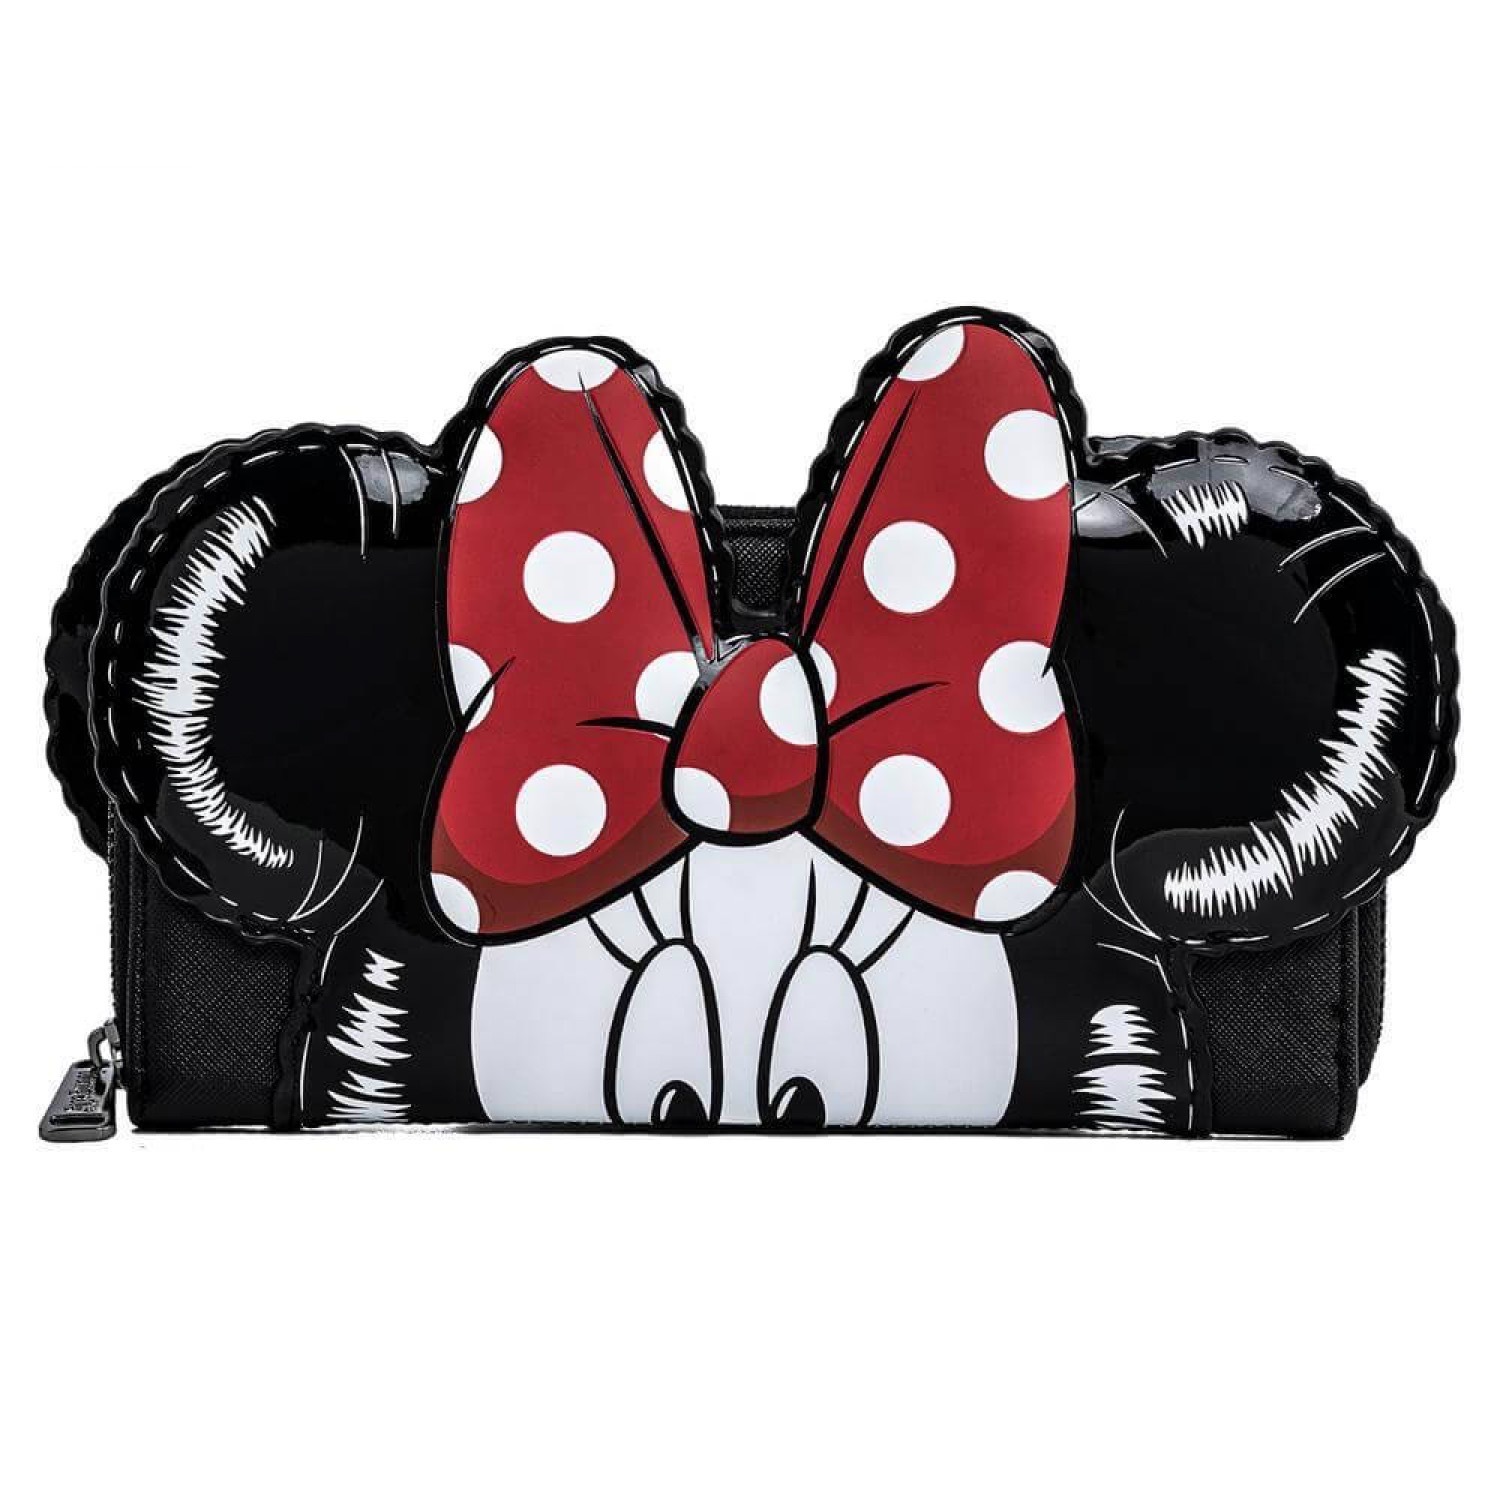 Loungefly Select (Disney, DC, Pokémon, & More) Bags $48 & Wallets $24 + $6 Flat Rate Shipping